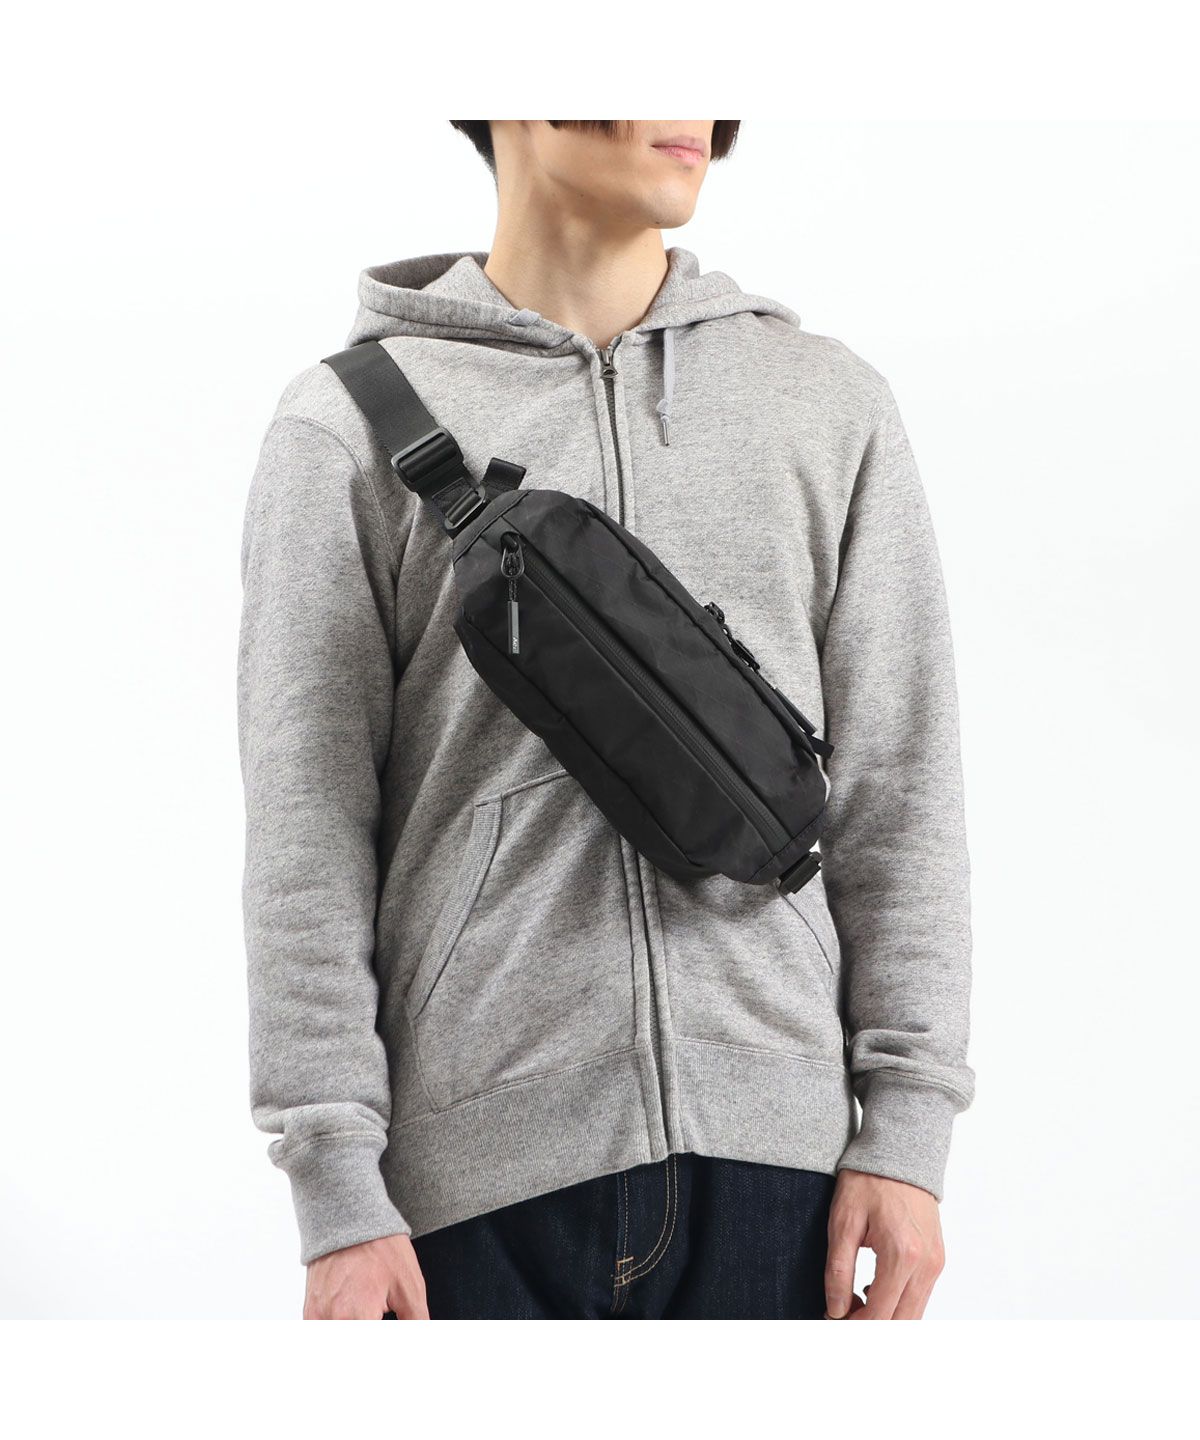 AER City Sling 2 X-Pac ボディバッグ-